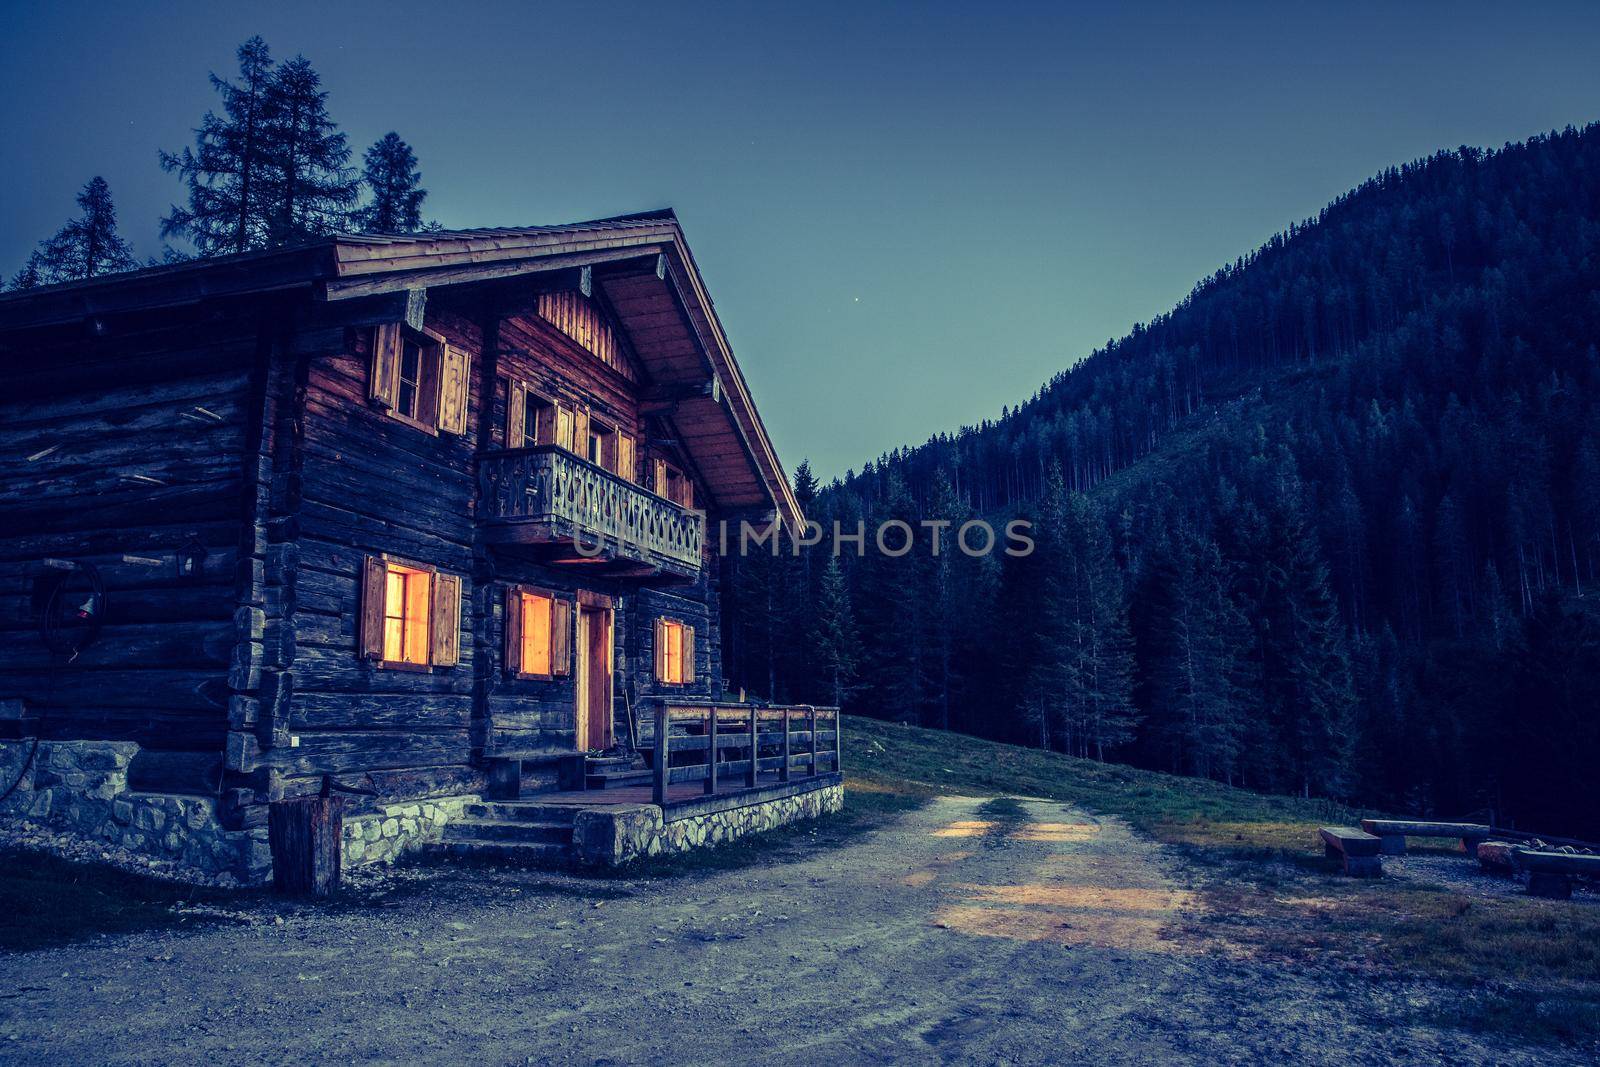 Holiday in the alps: Rustic wooden farm hut in the night. by Daxenbichler